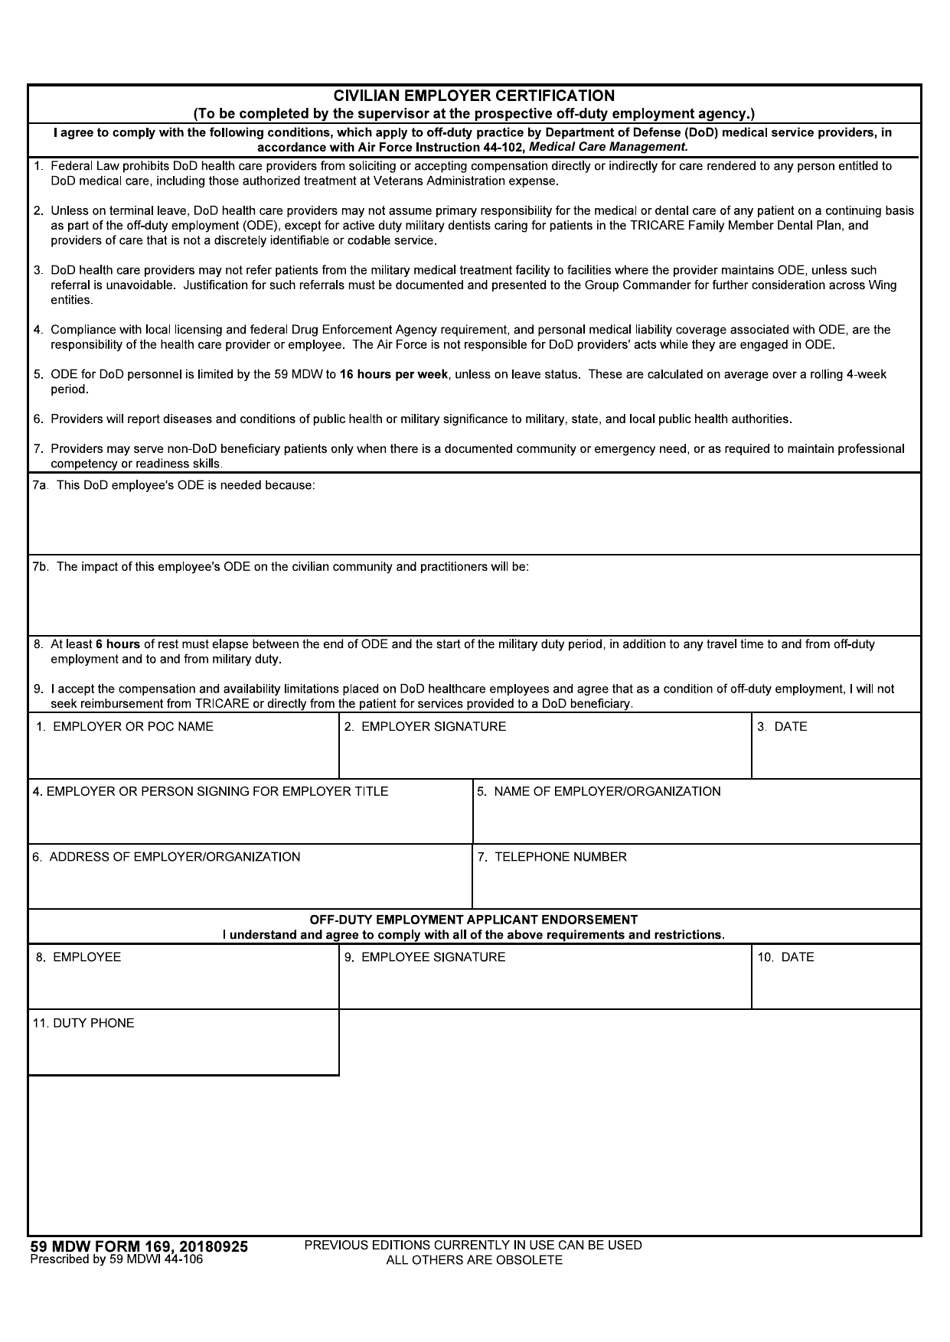 59 MDW Form 169 Civilian Employer Certification, Page 1